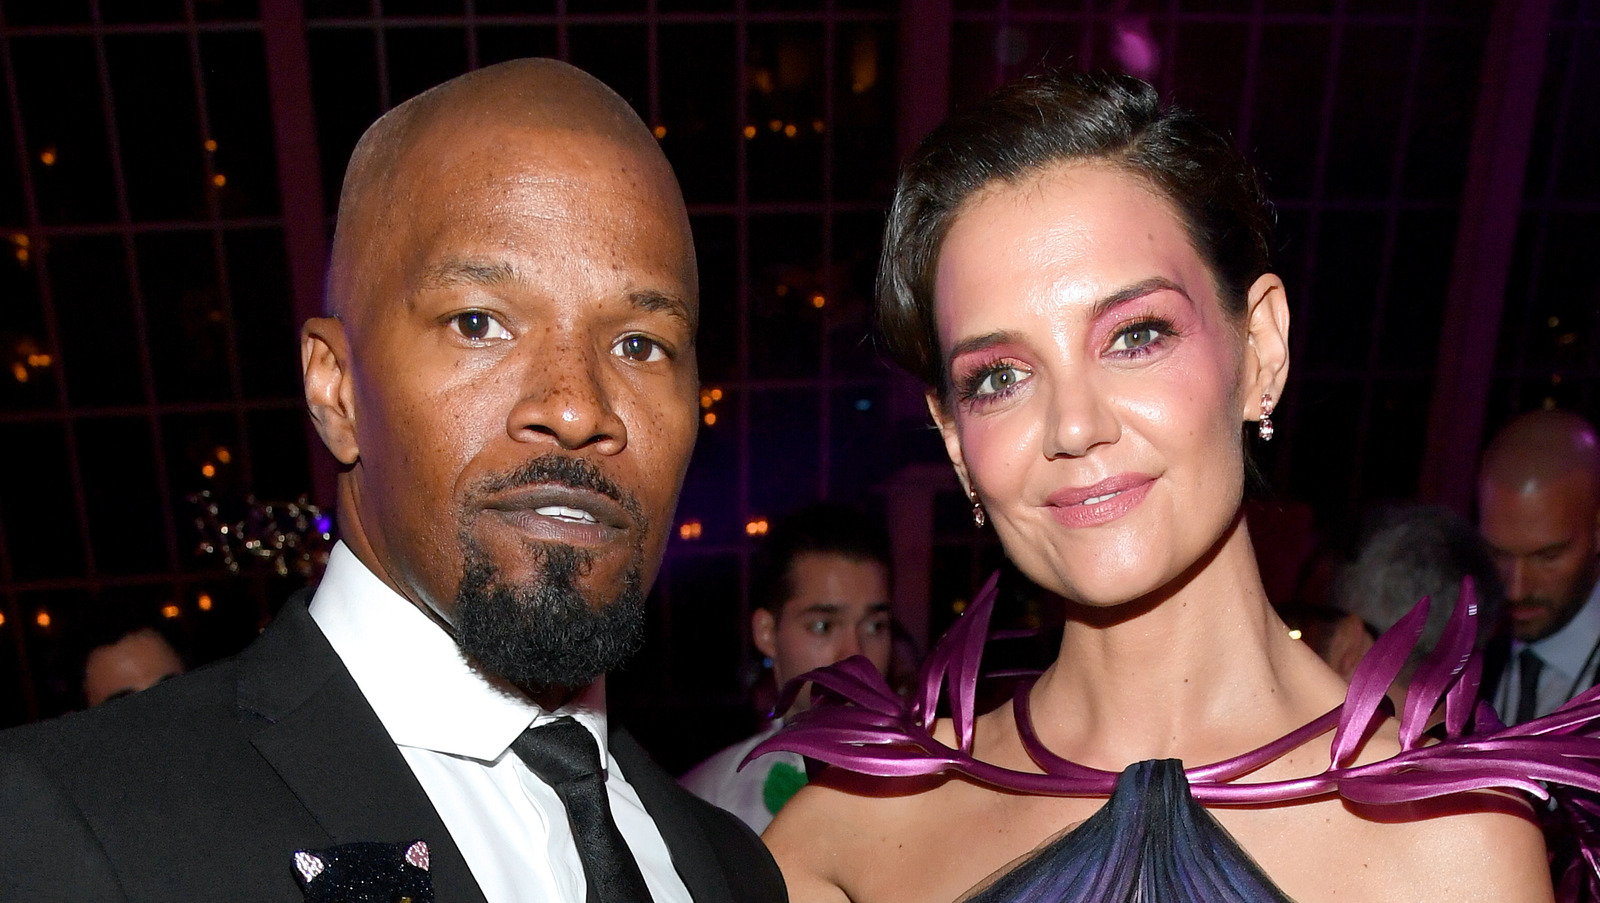 katie holmes and jamie foxx who ended their under the radar romance